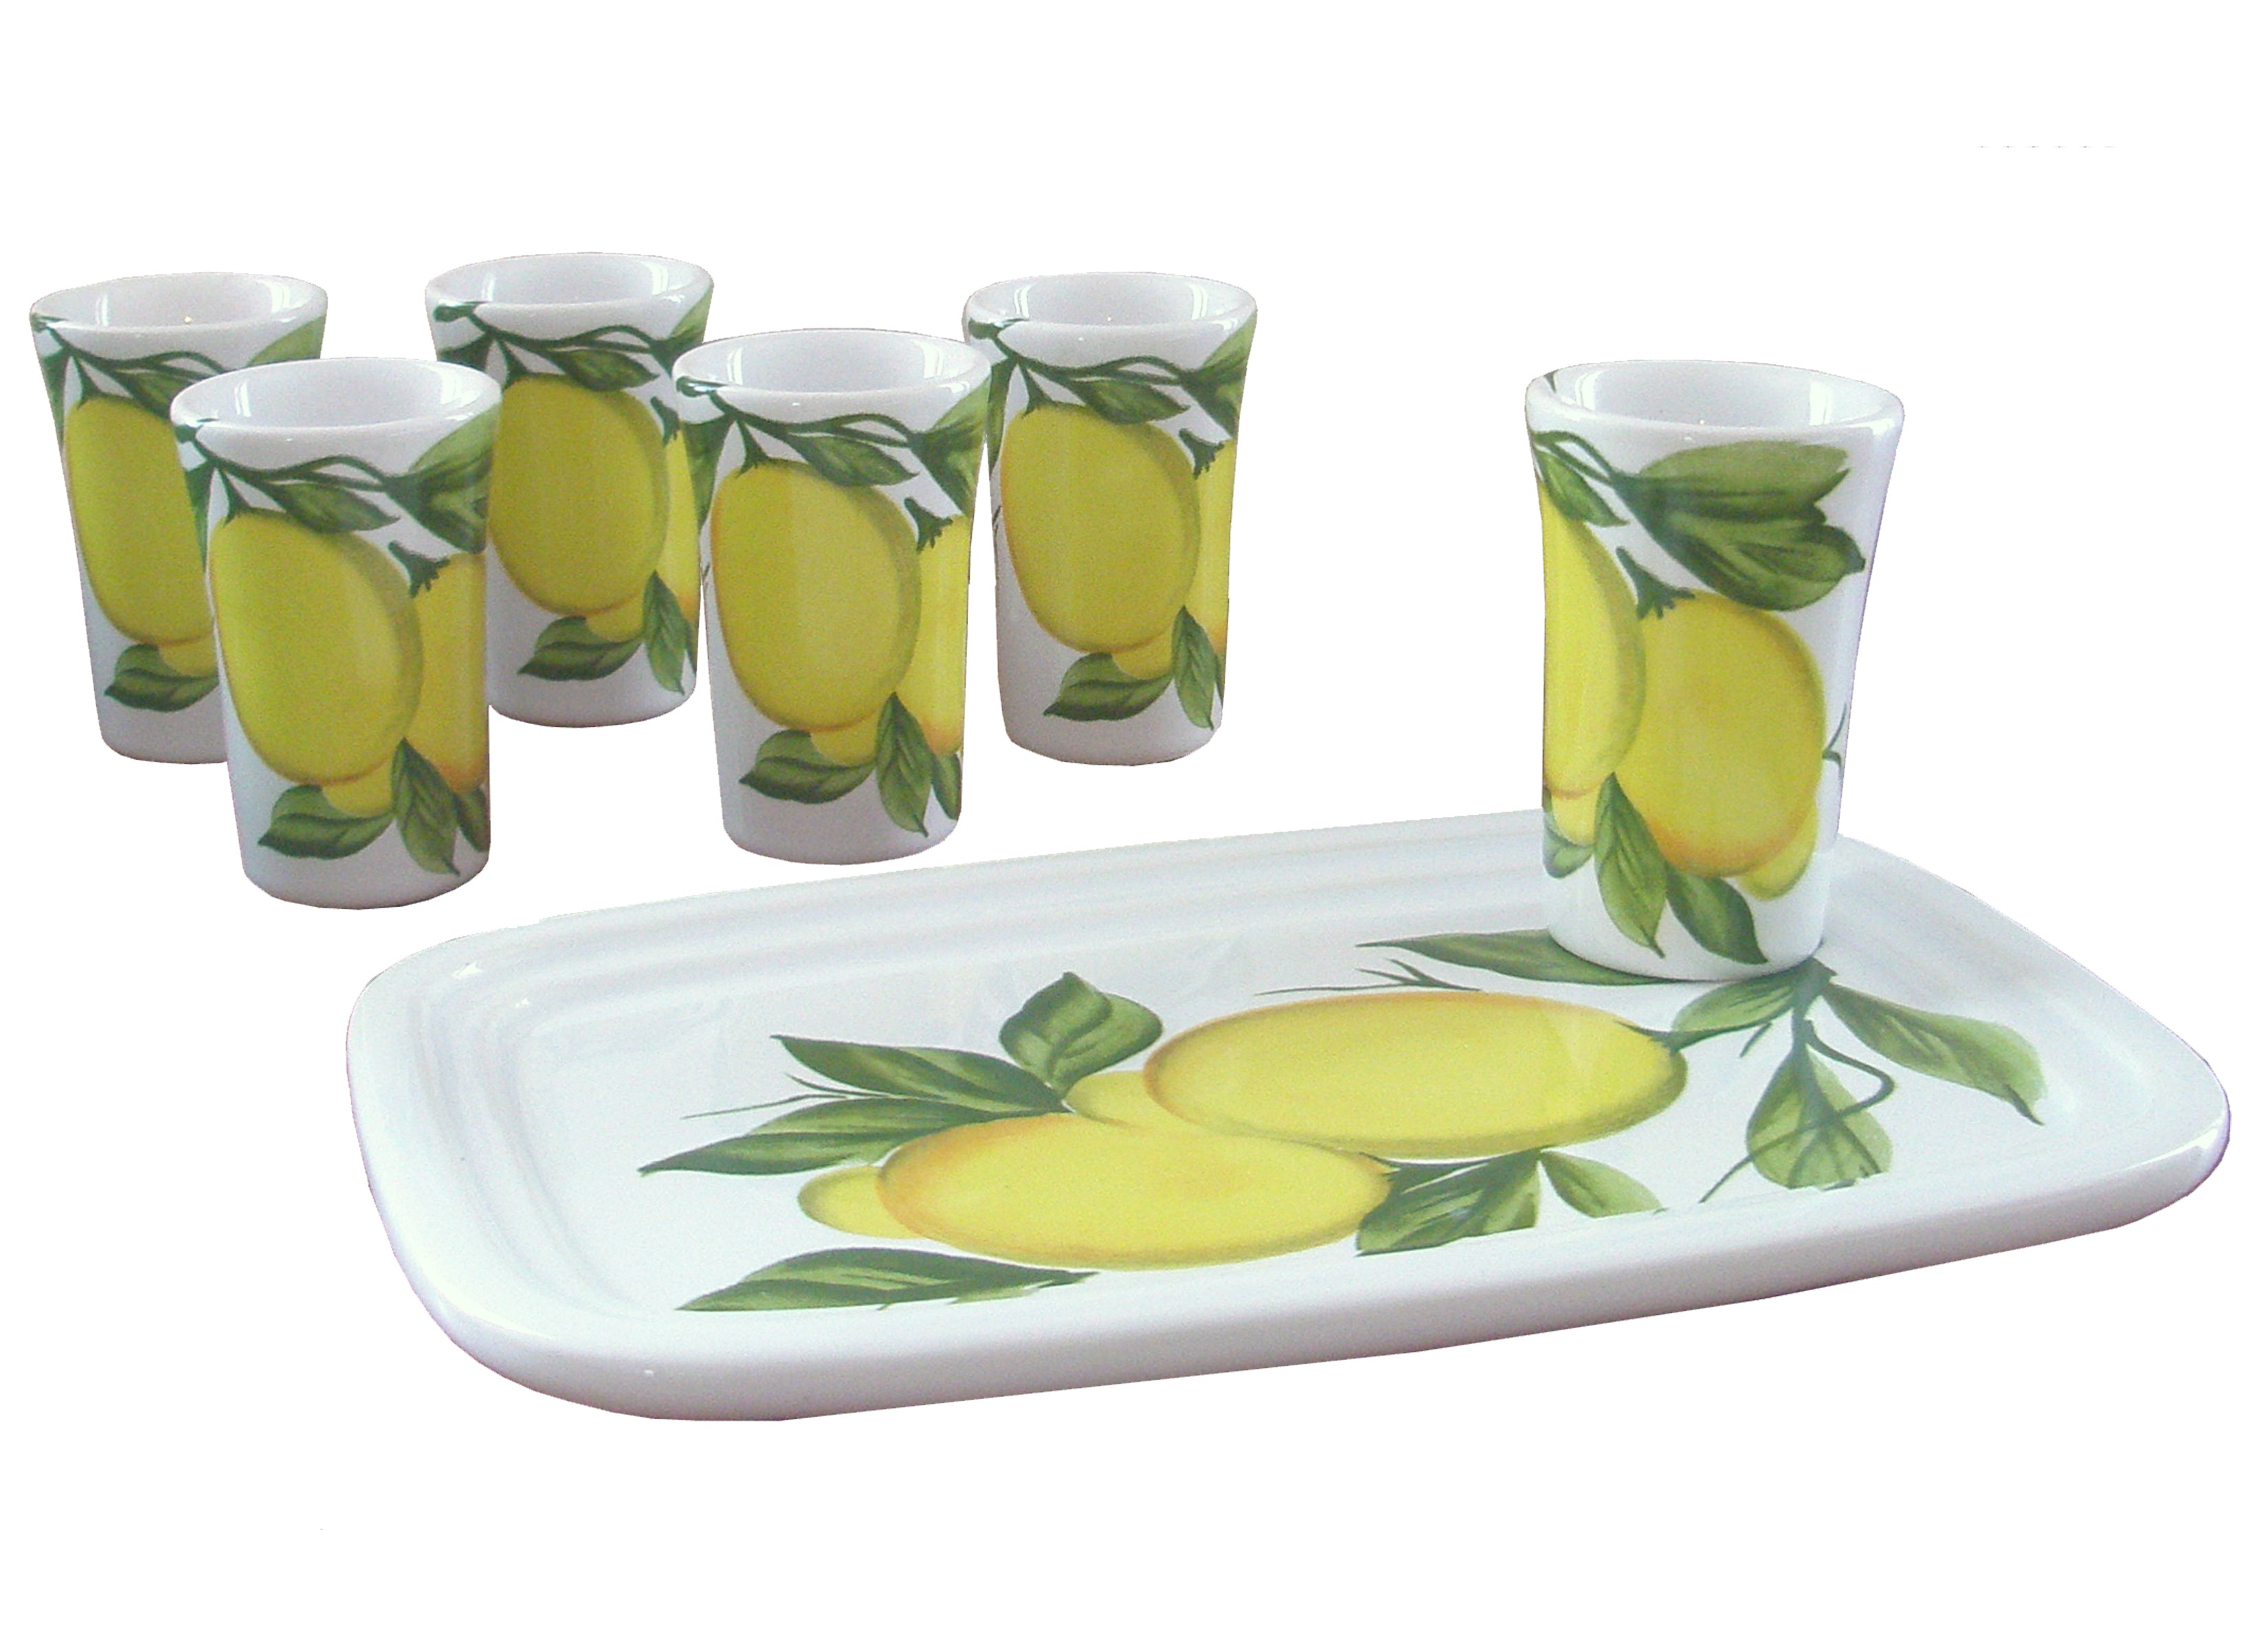 Limoncello Set with 6 Ceramic Glasses and Tray